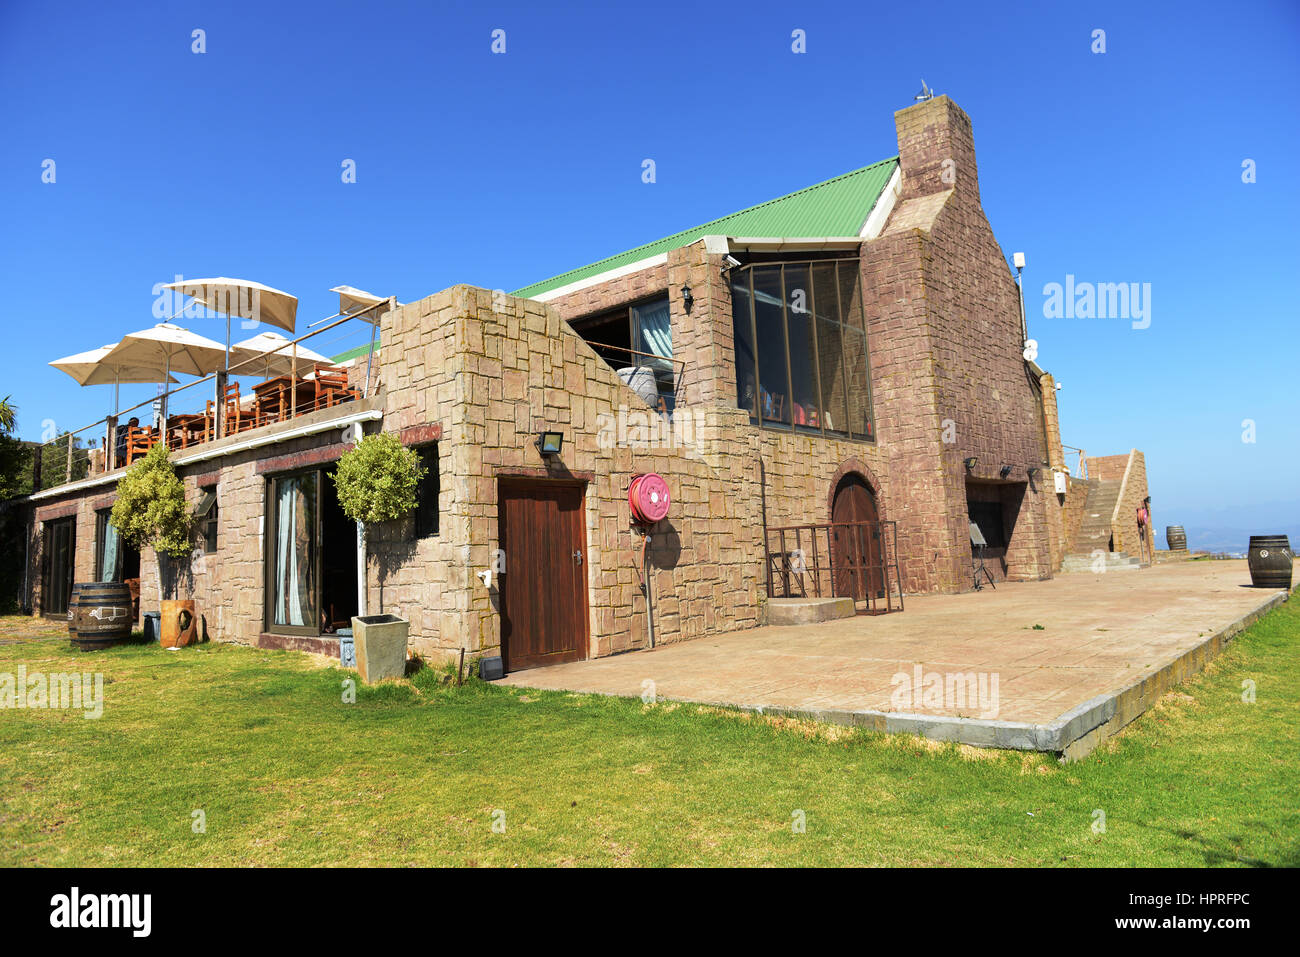 The Blomendal restaurant and winery near Cape Town, South Africa. Stock Photo